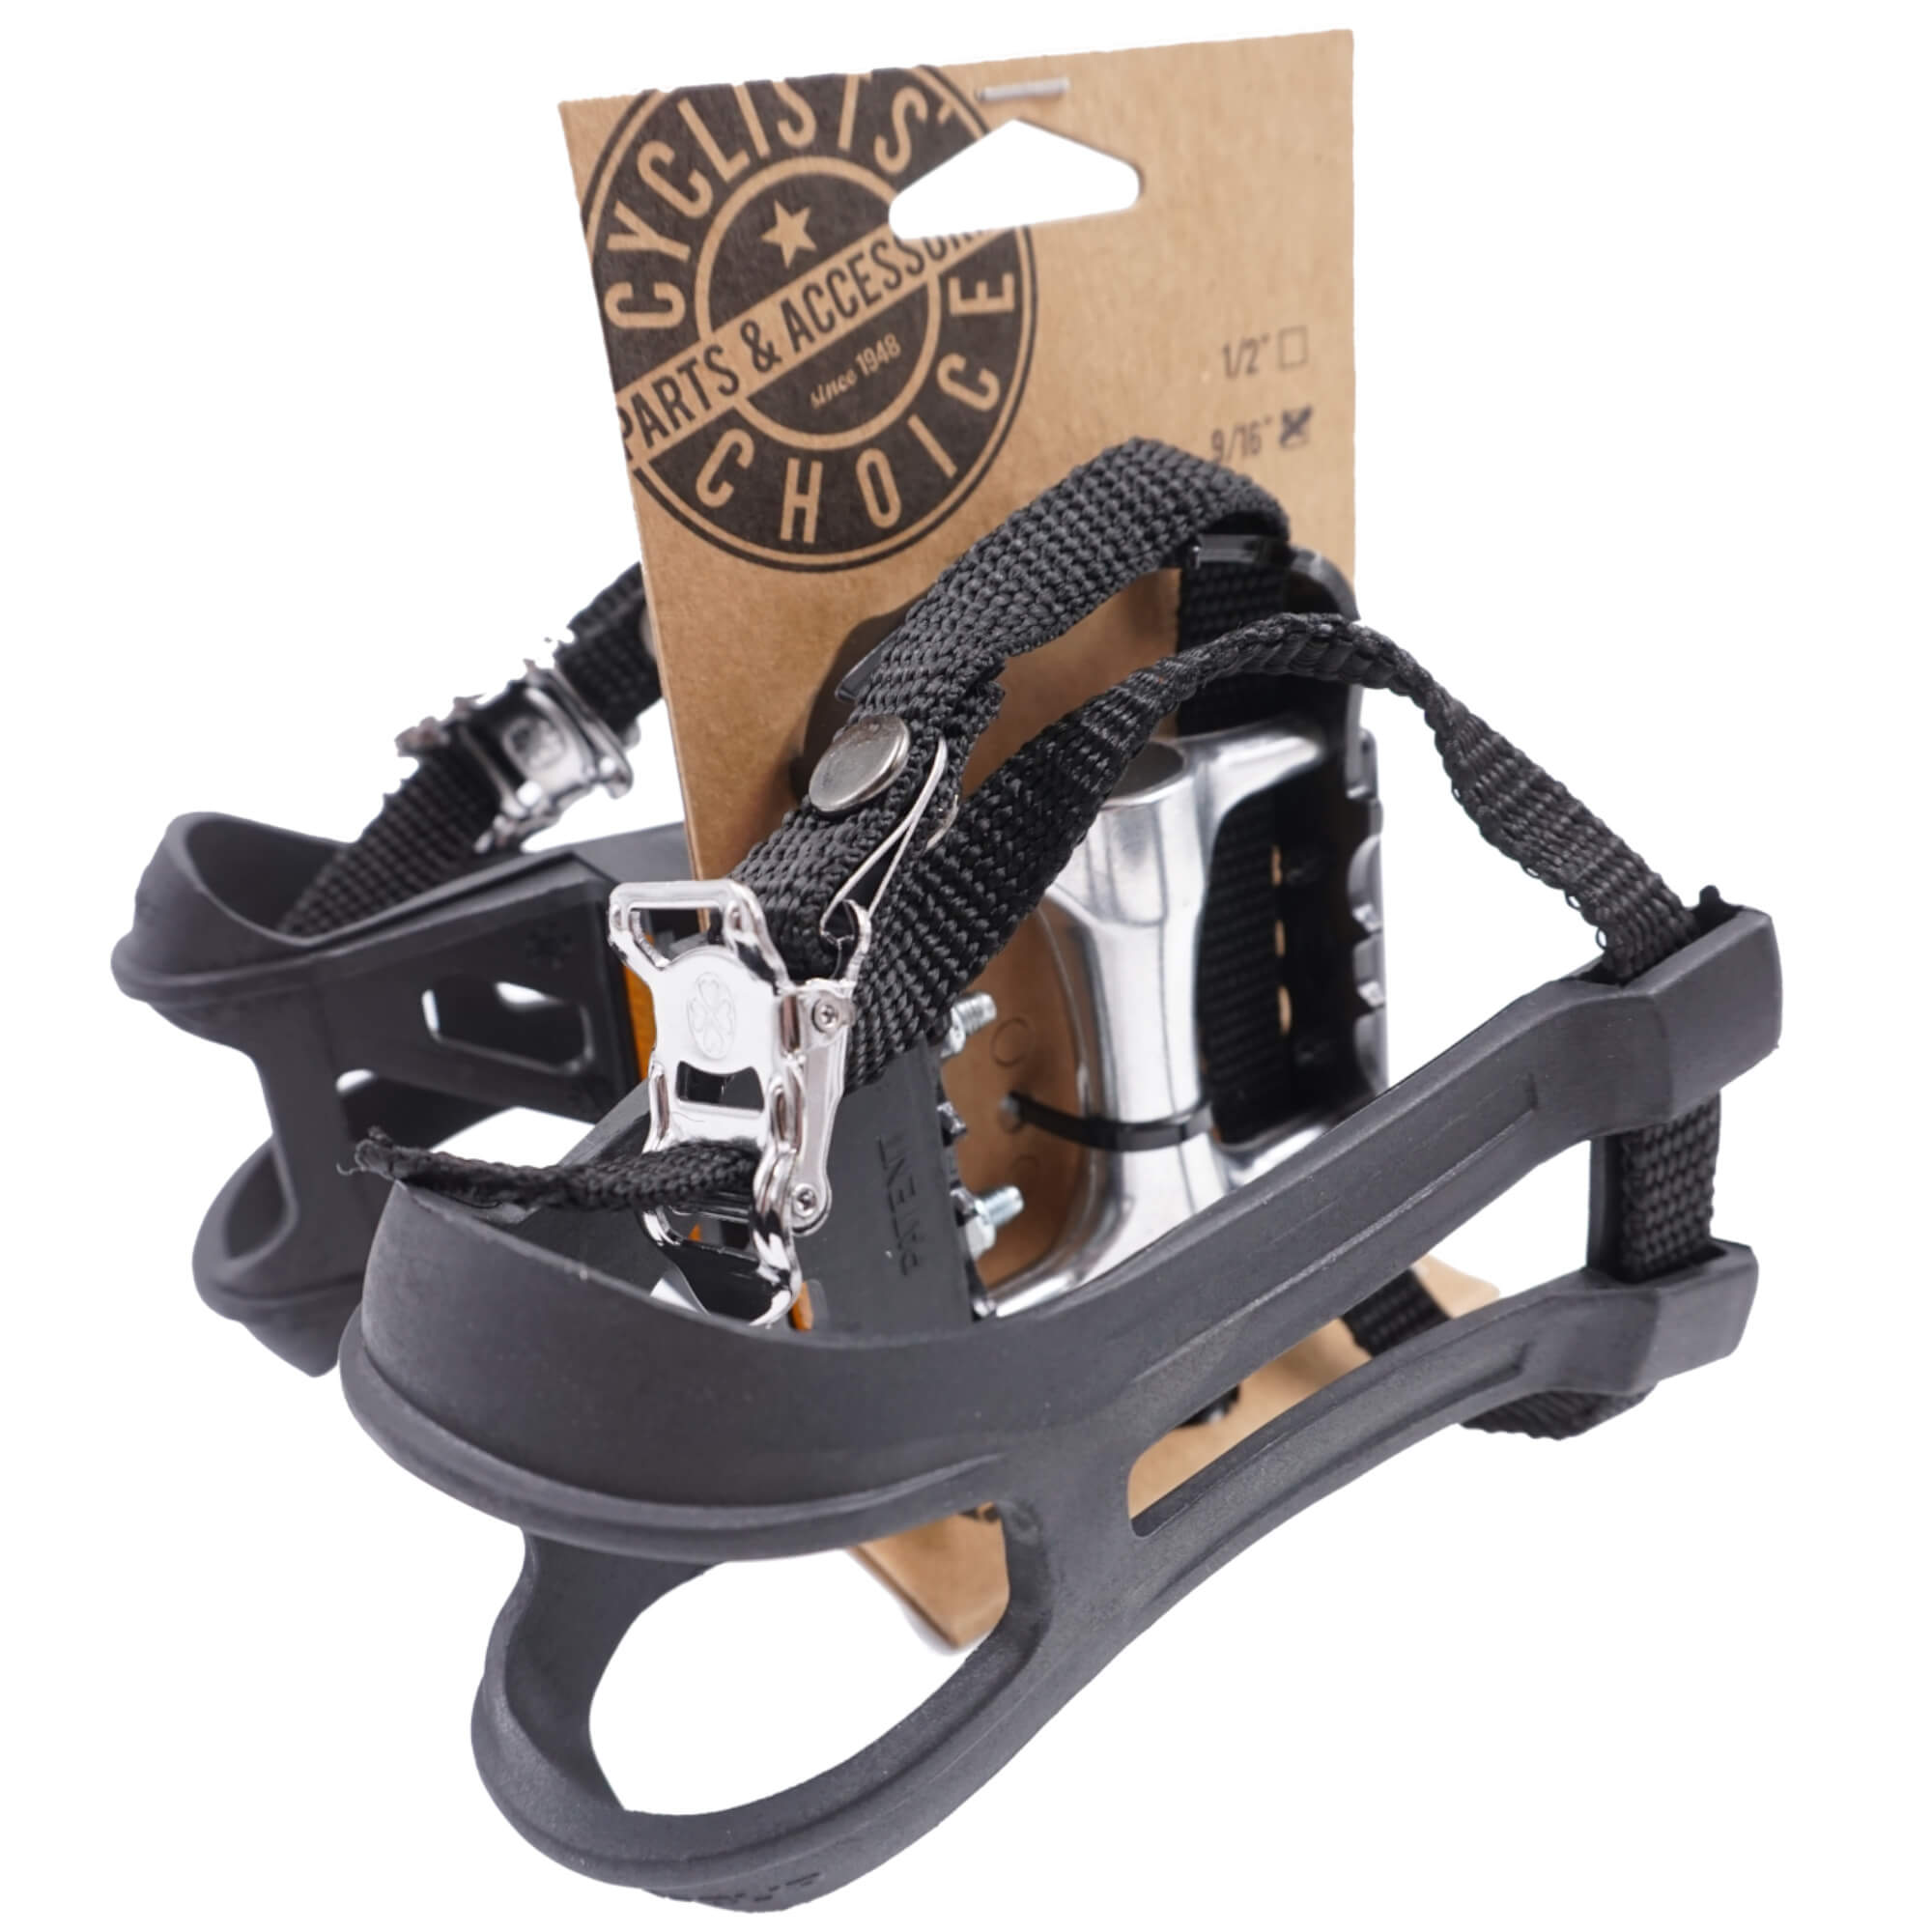 VP-349AT Alloy Pedals with Toe Clips - The Bikesmiths